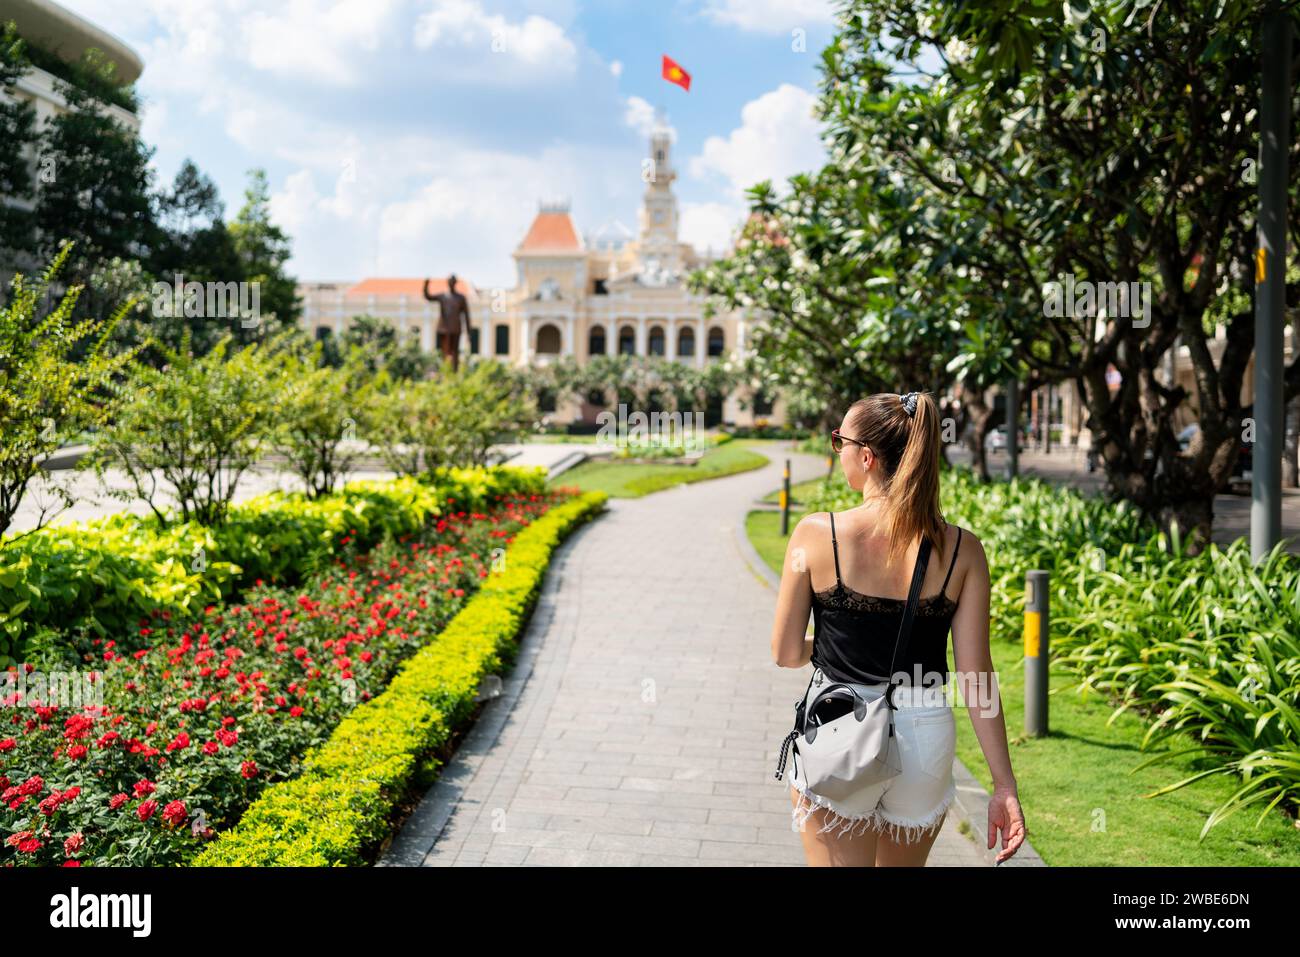 Tourist in Saigon. Tourism and travel in Ho Chi Minh City, Vietnam. Woman and statue. Girl walking in urban park garden square in HCMC. Stock Photo